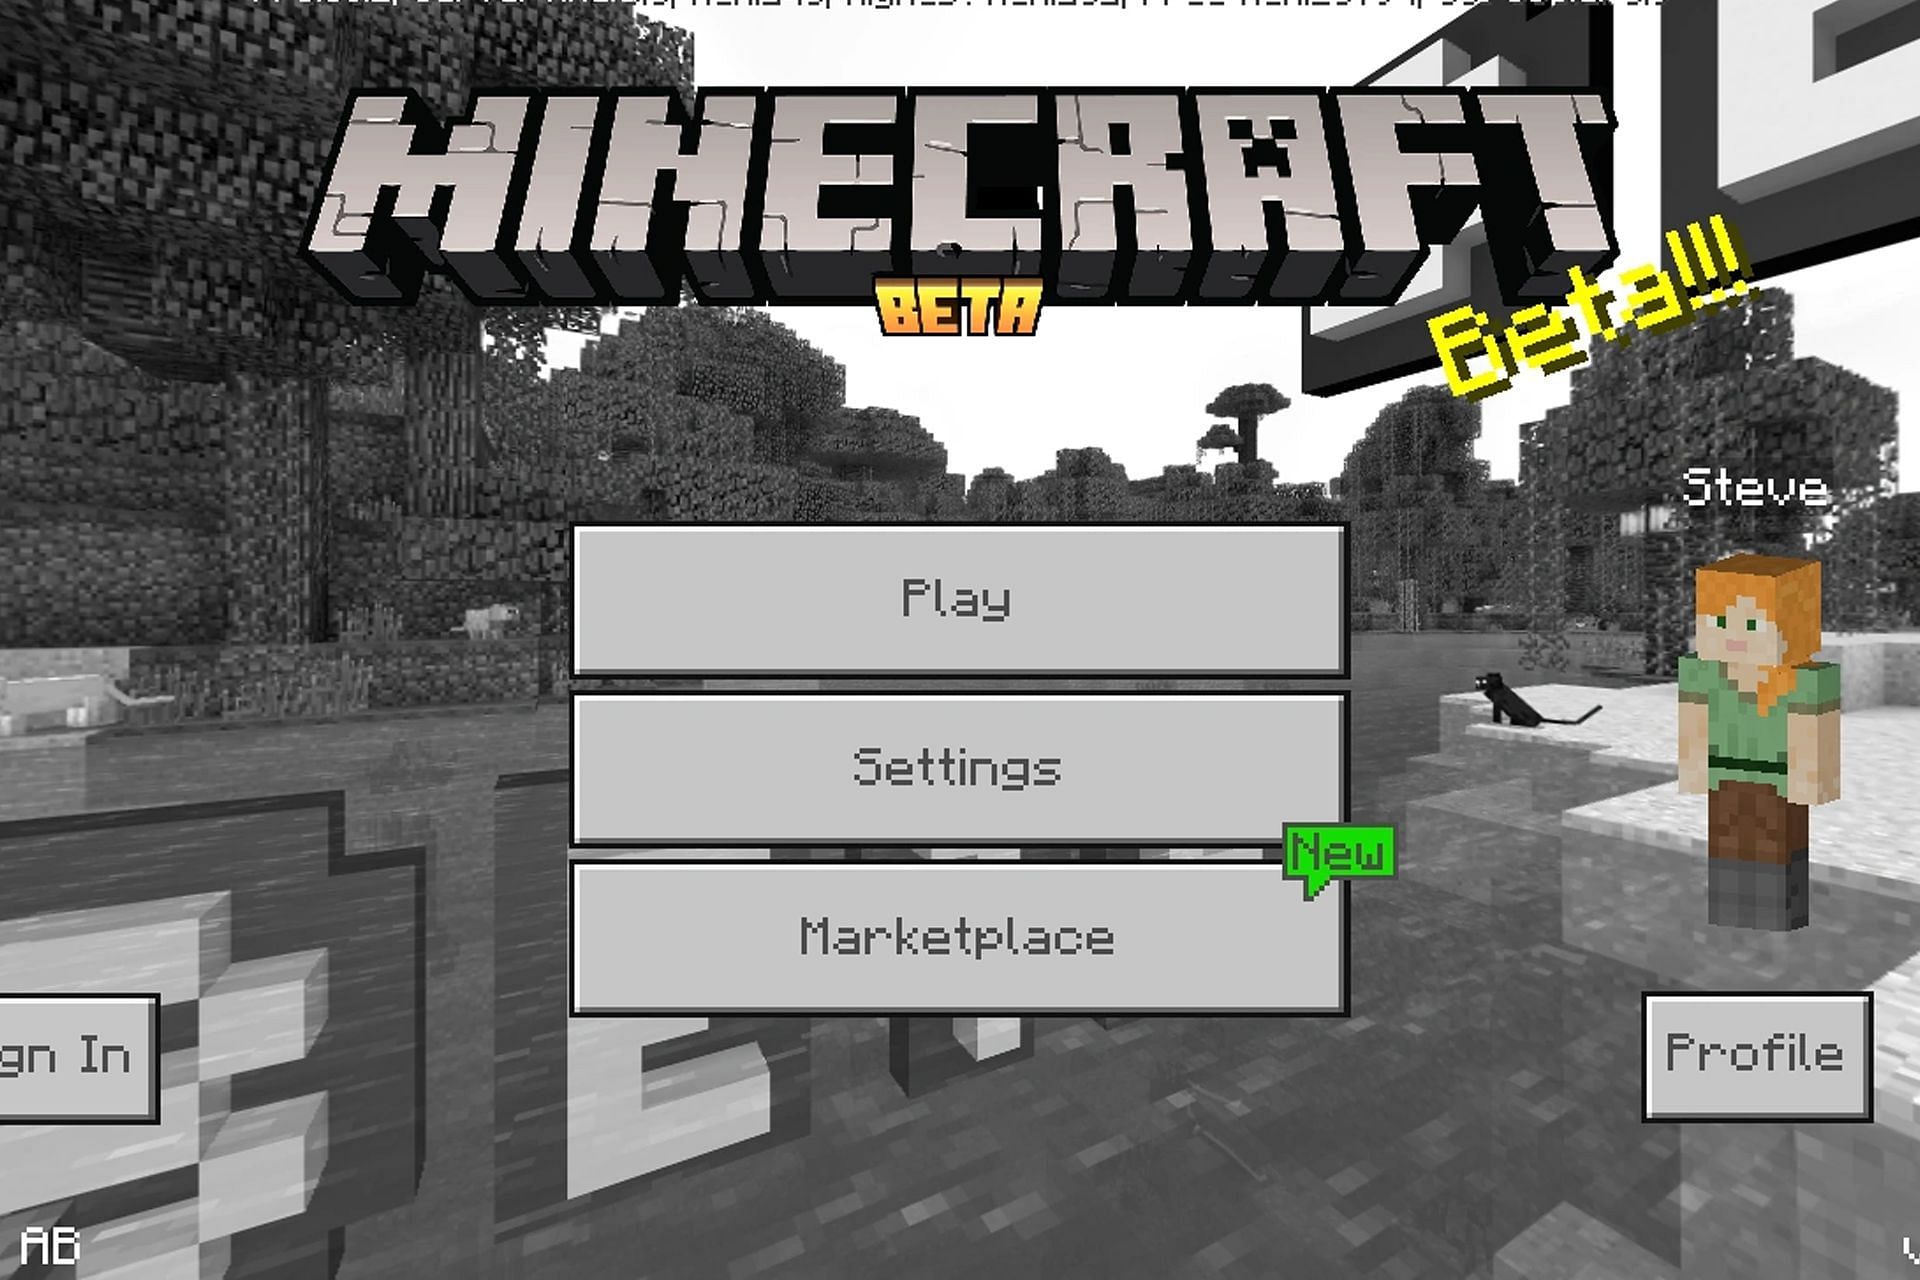 How to leave Minecraft Beta on mobile devices